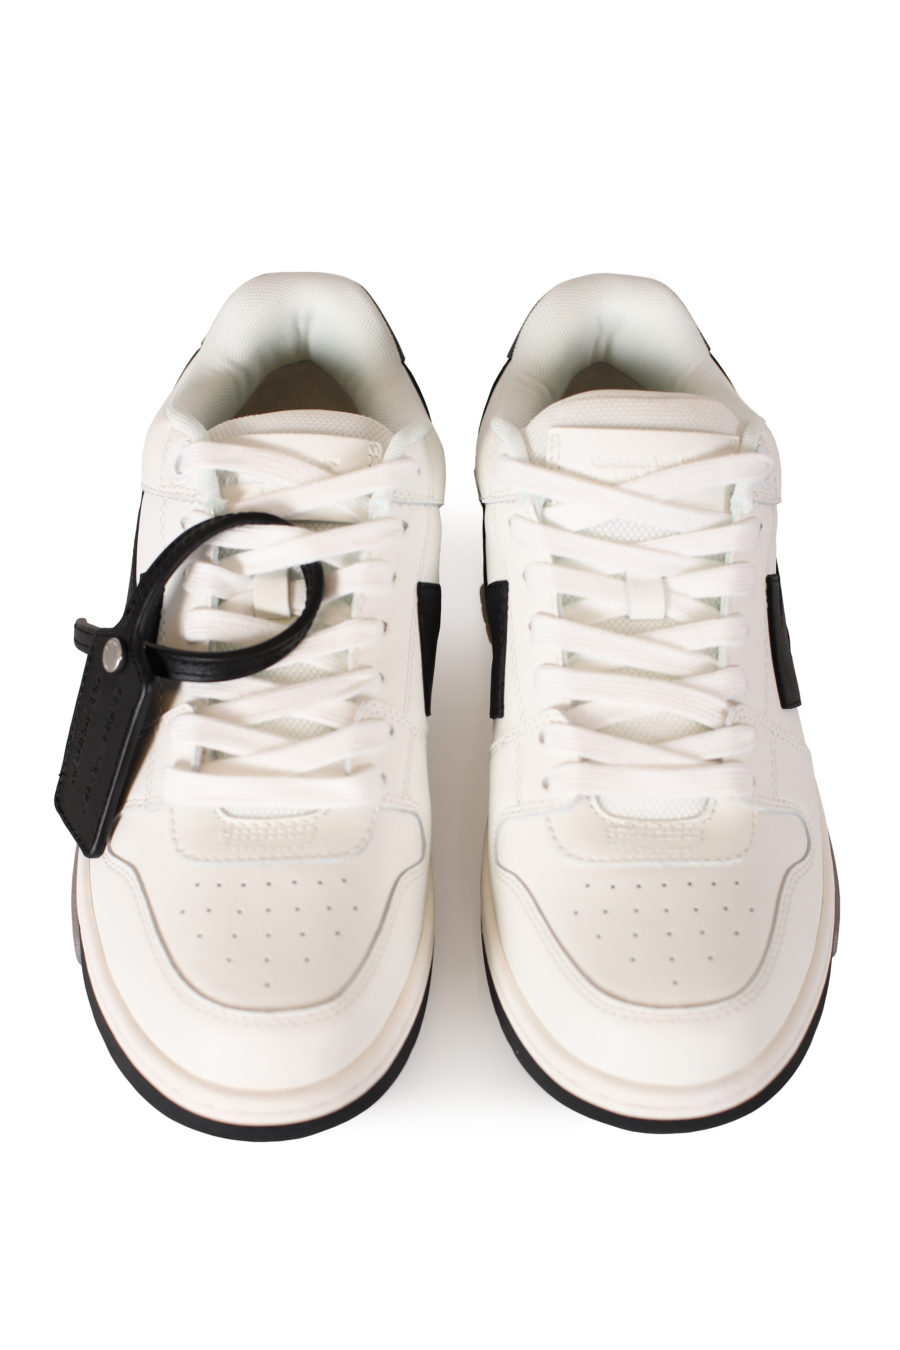 Zapatillas "out of office" blancos con negro - IMG 1116